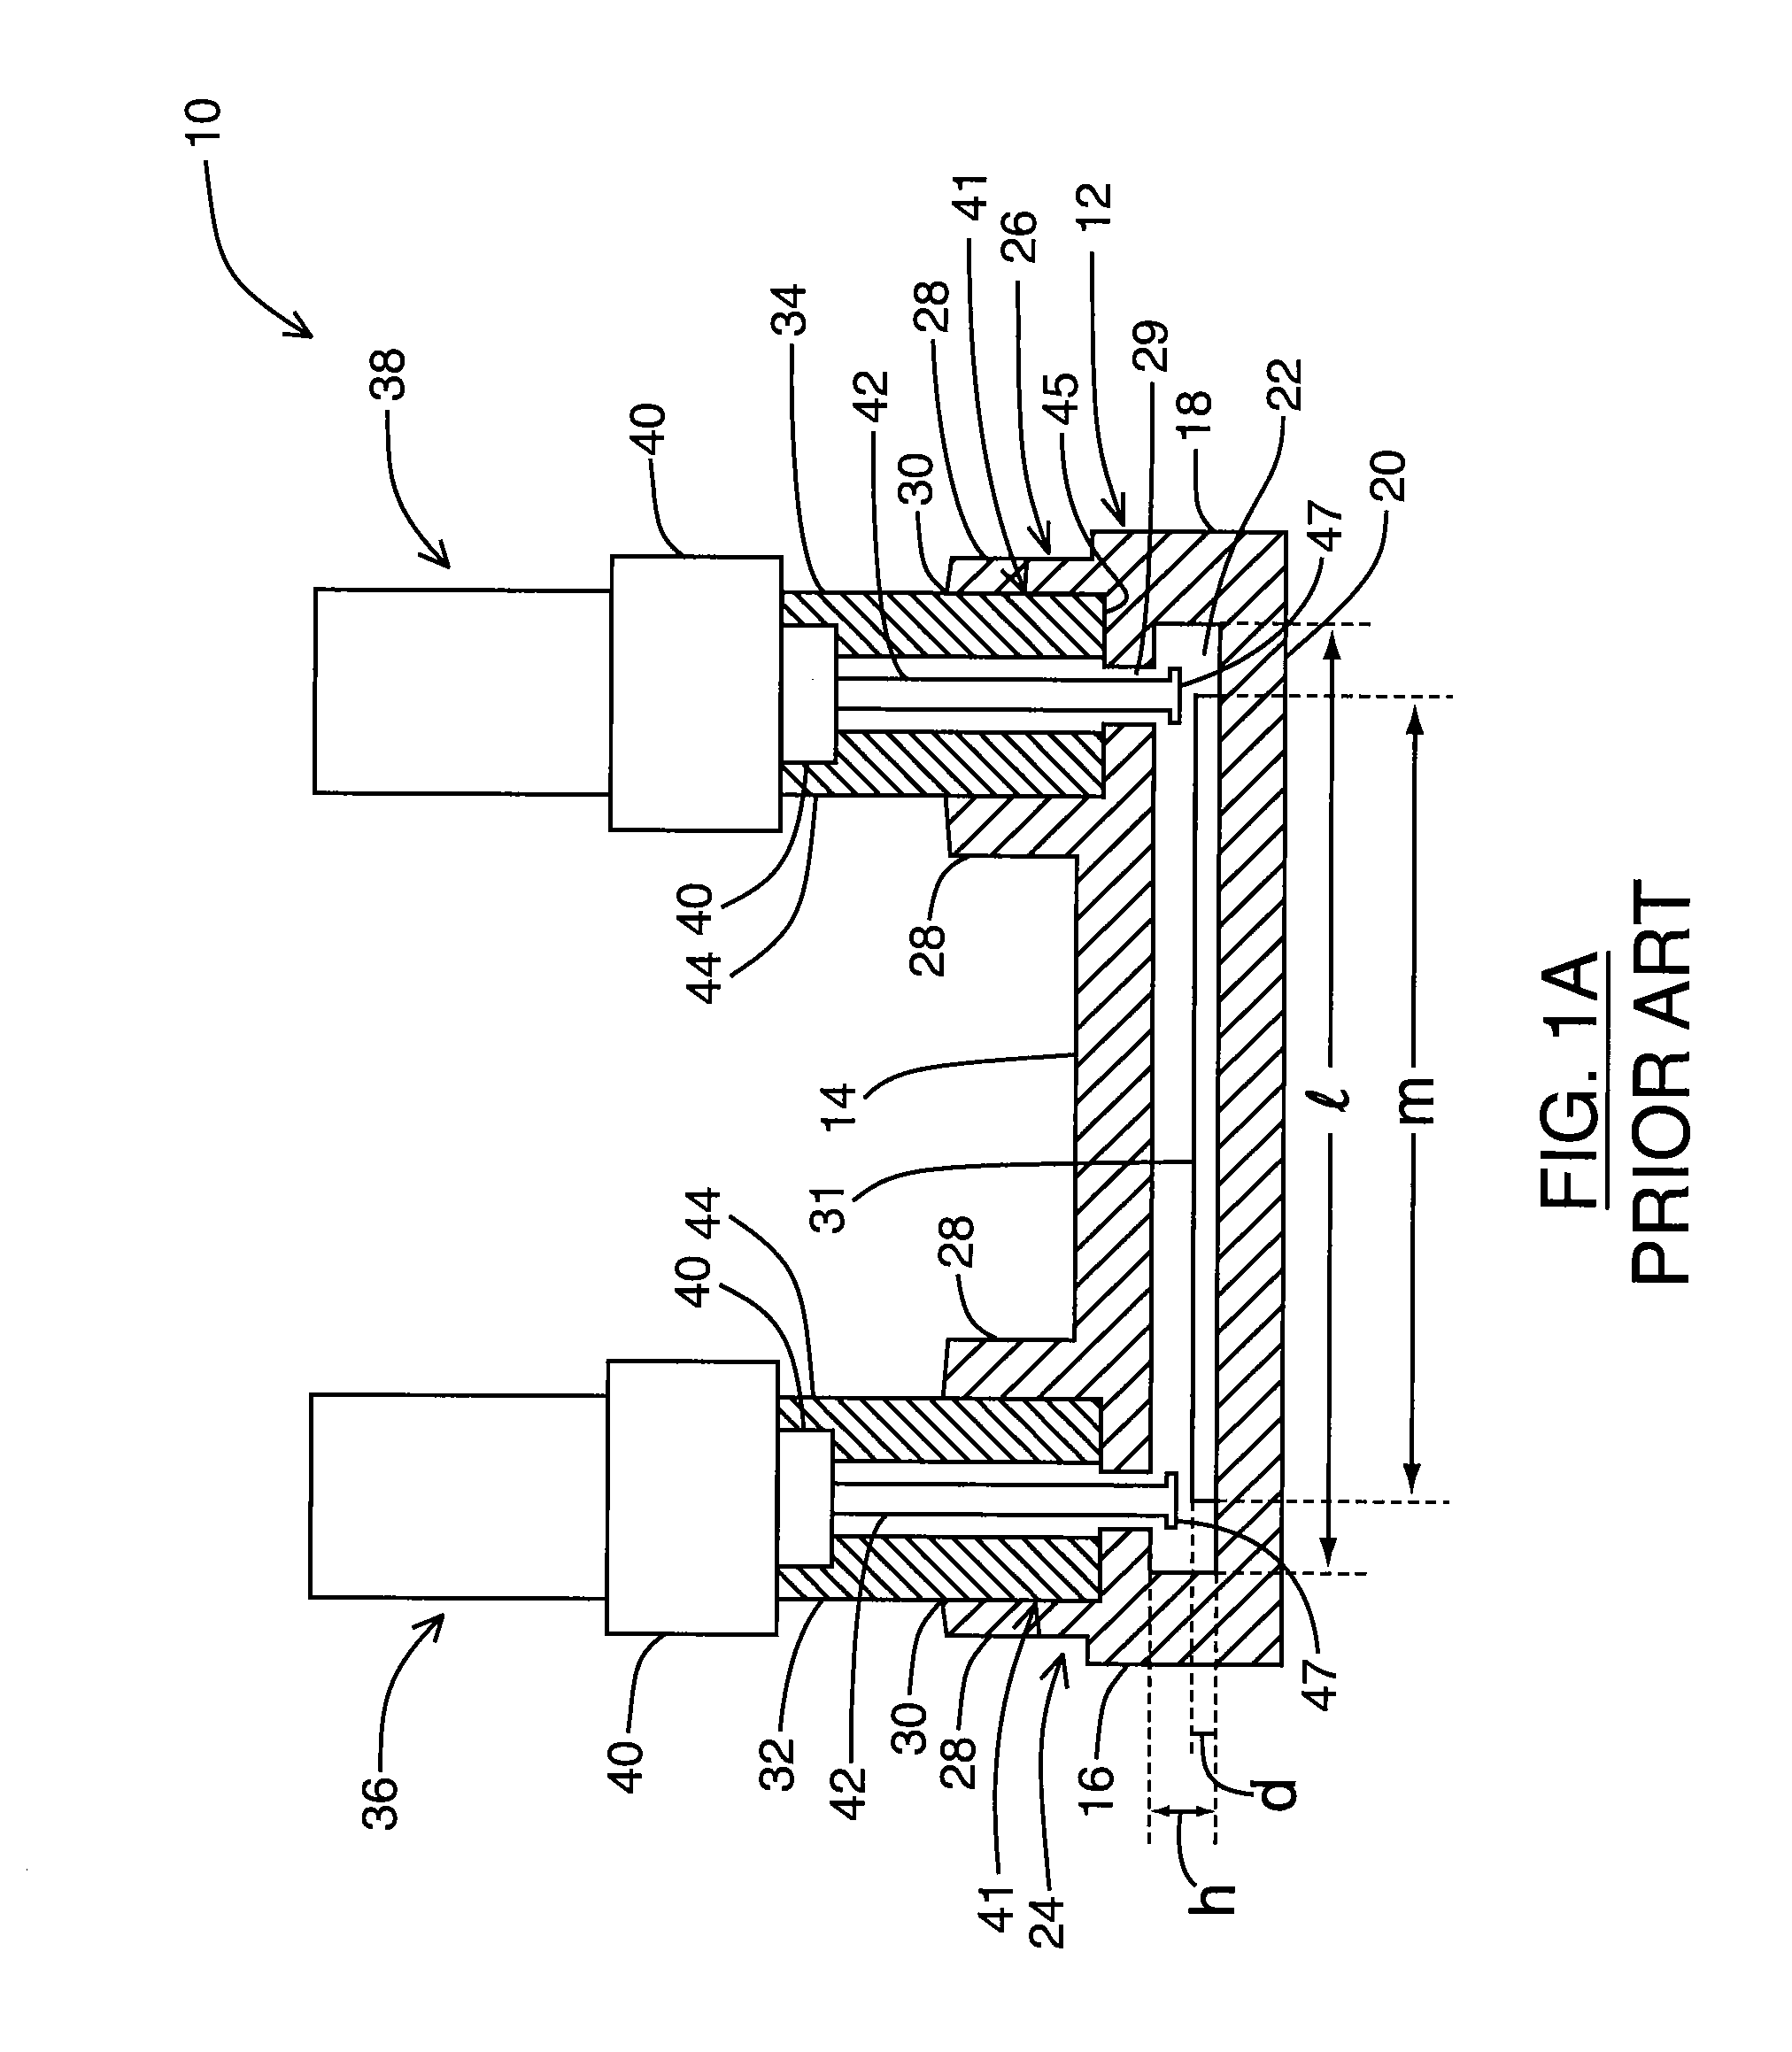 Configurable high frequency coaxial switch